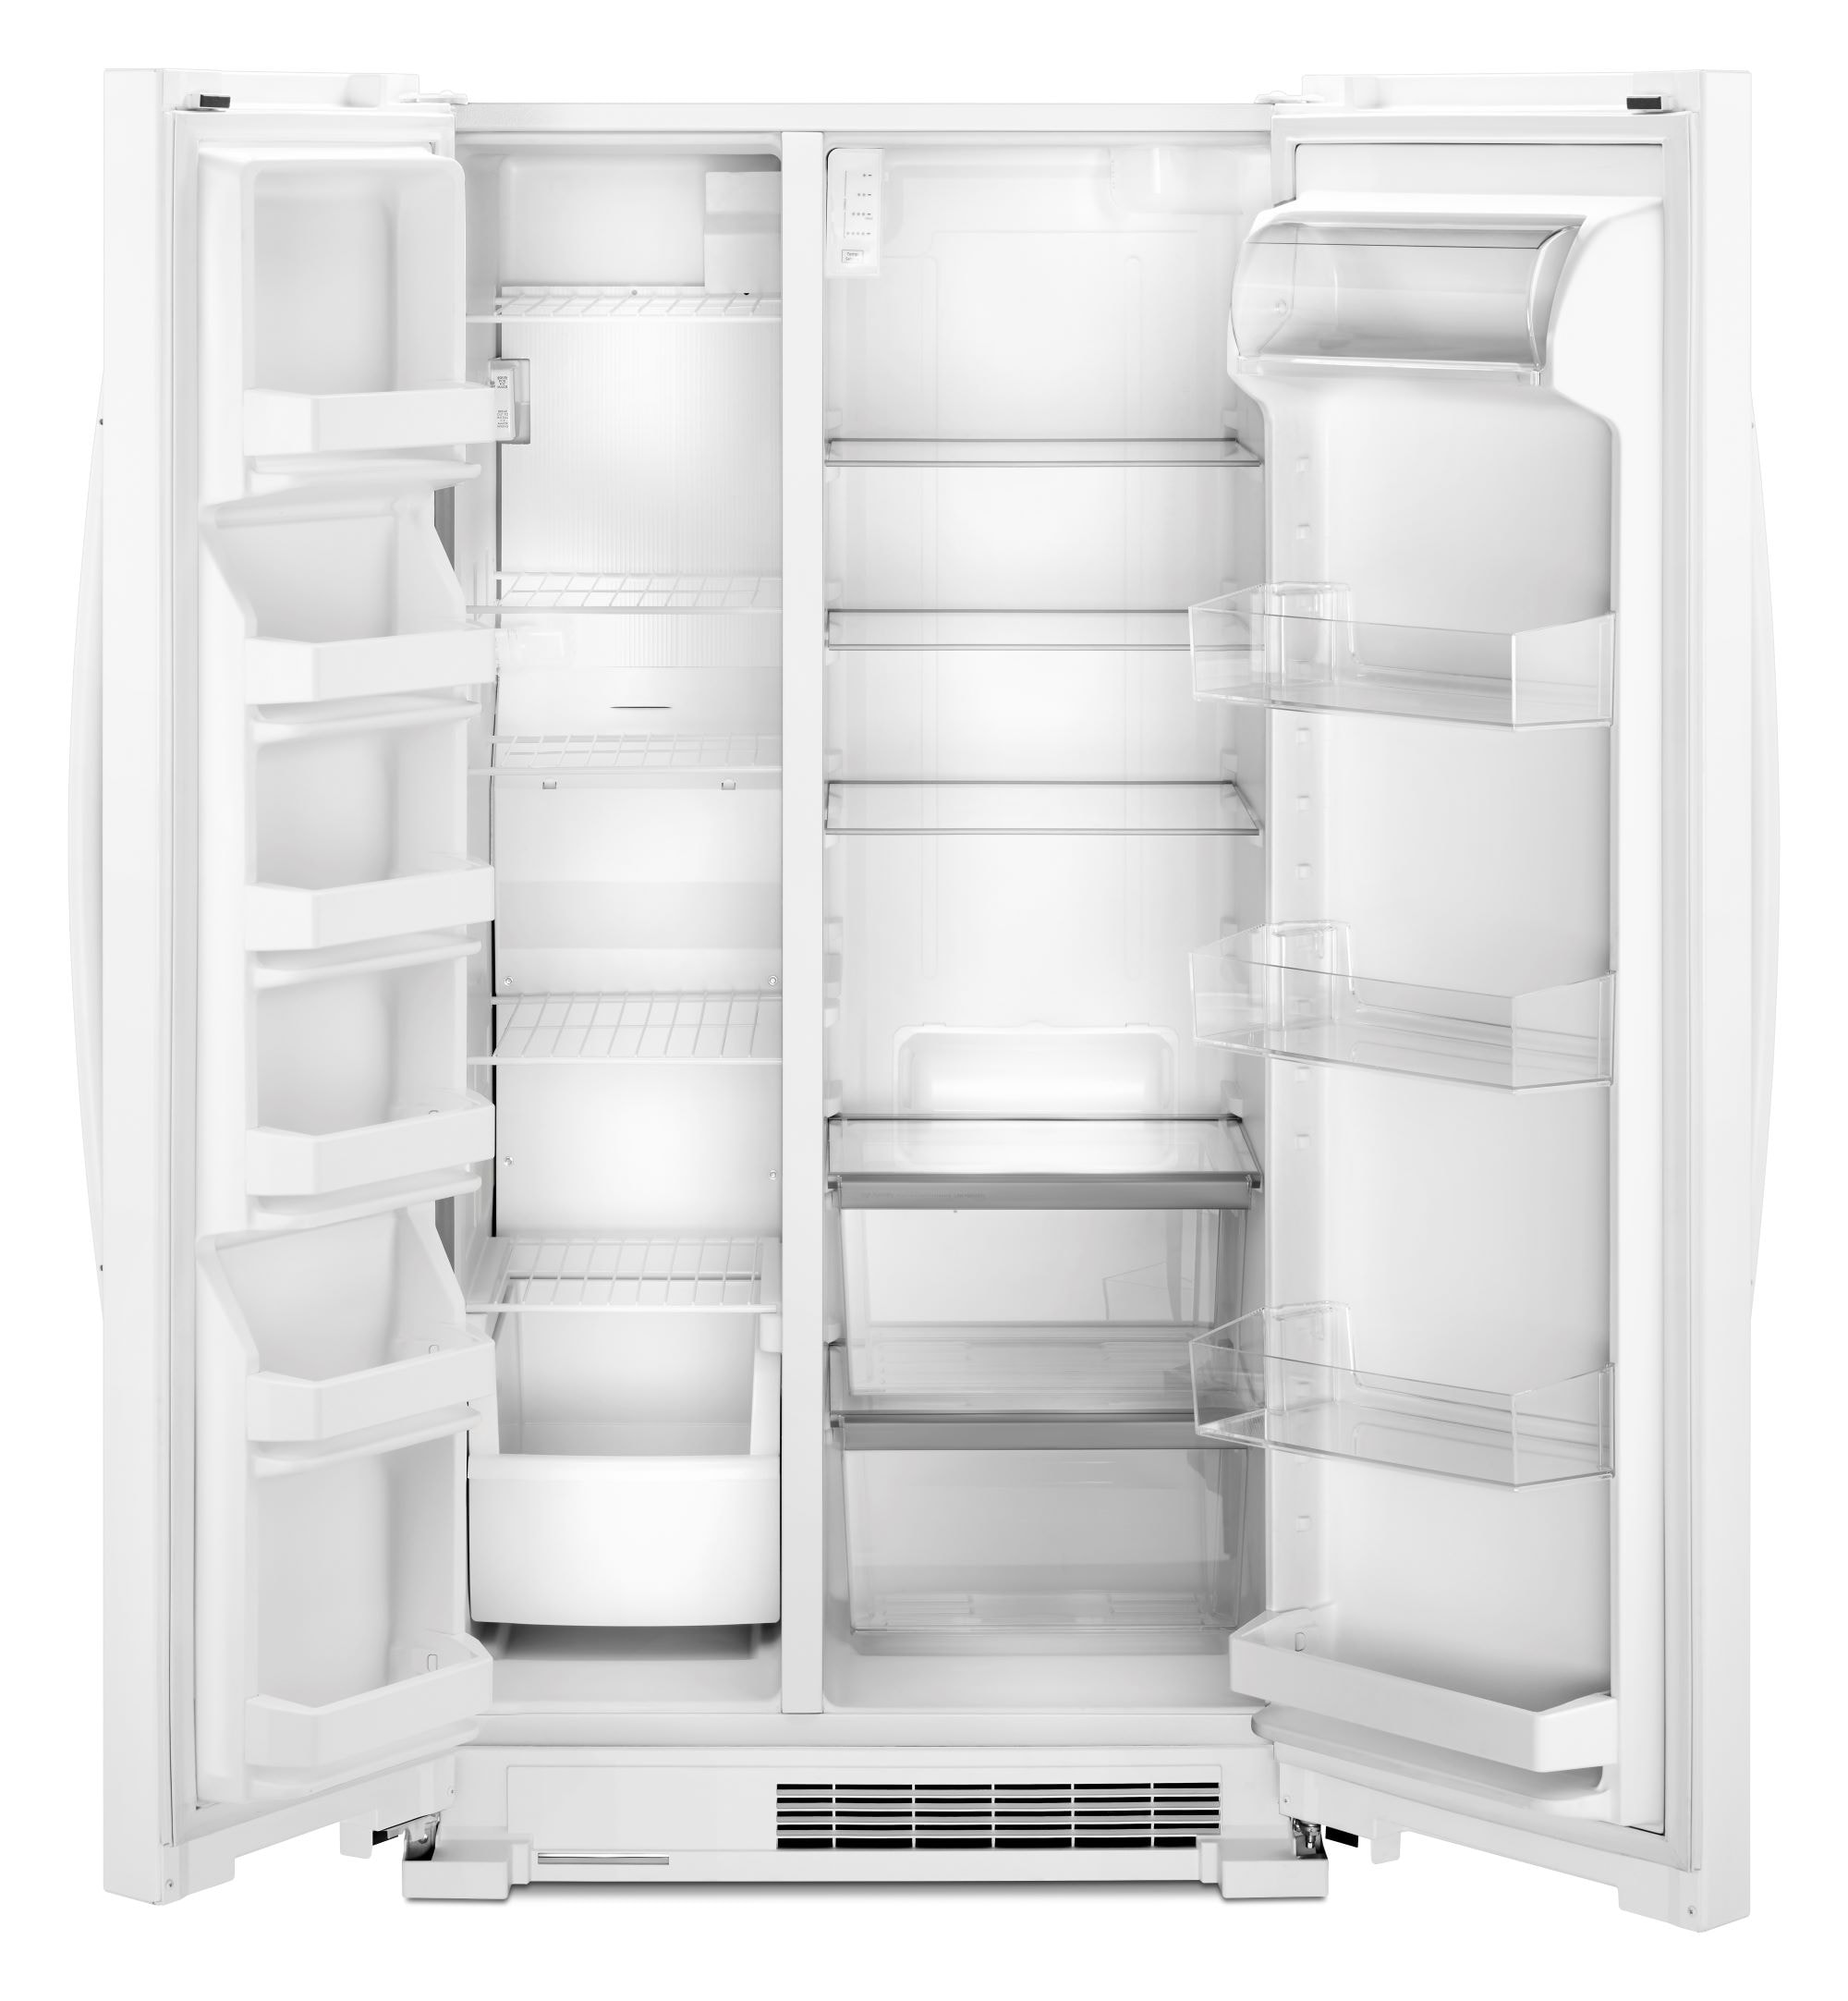 Whirlpool 25.1-cu ft Side-by-Side Refrigerator (White) in the Side-by ...